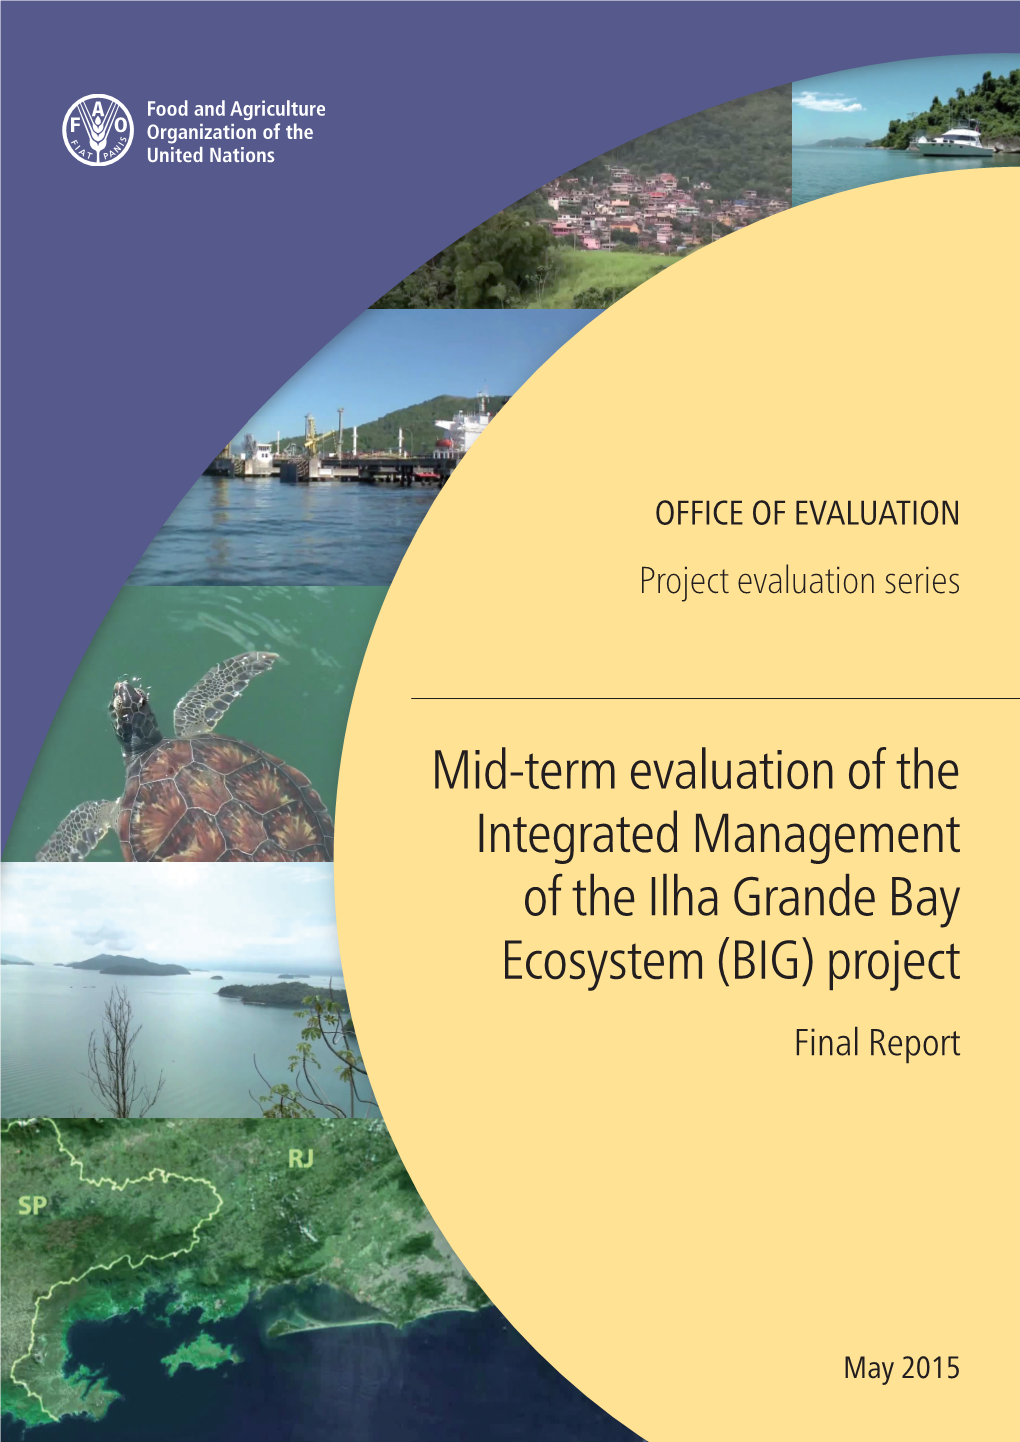 Mid-Term Evaluation of the Integrated Management of the Ilha Grande Bay Ecosystem (BIG) Project Final Report